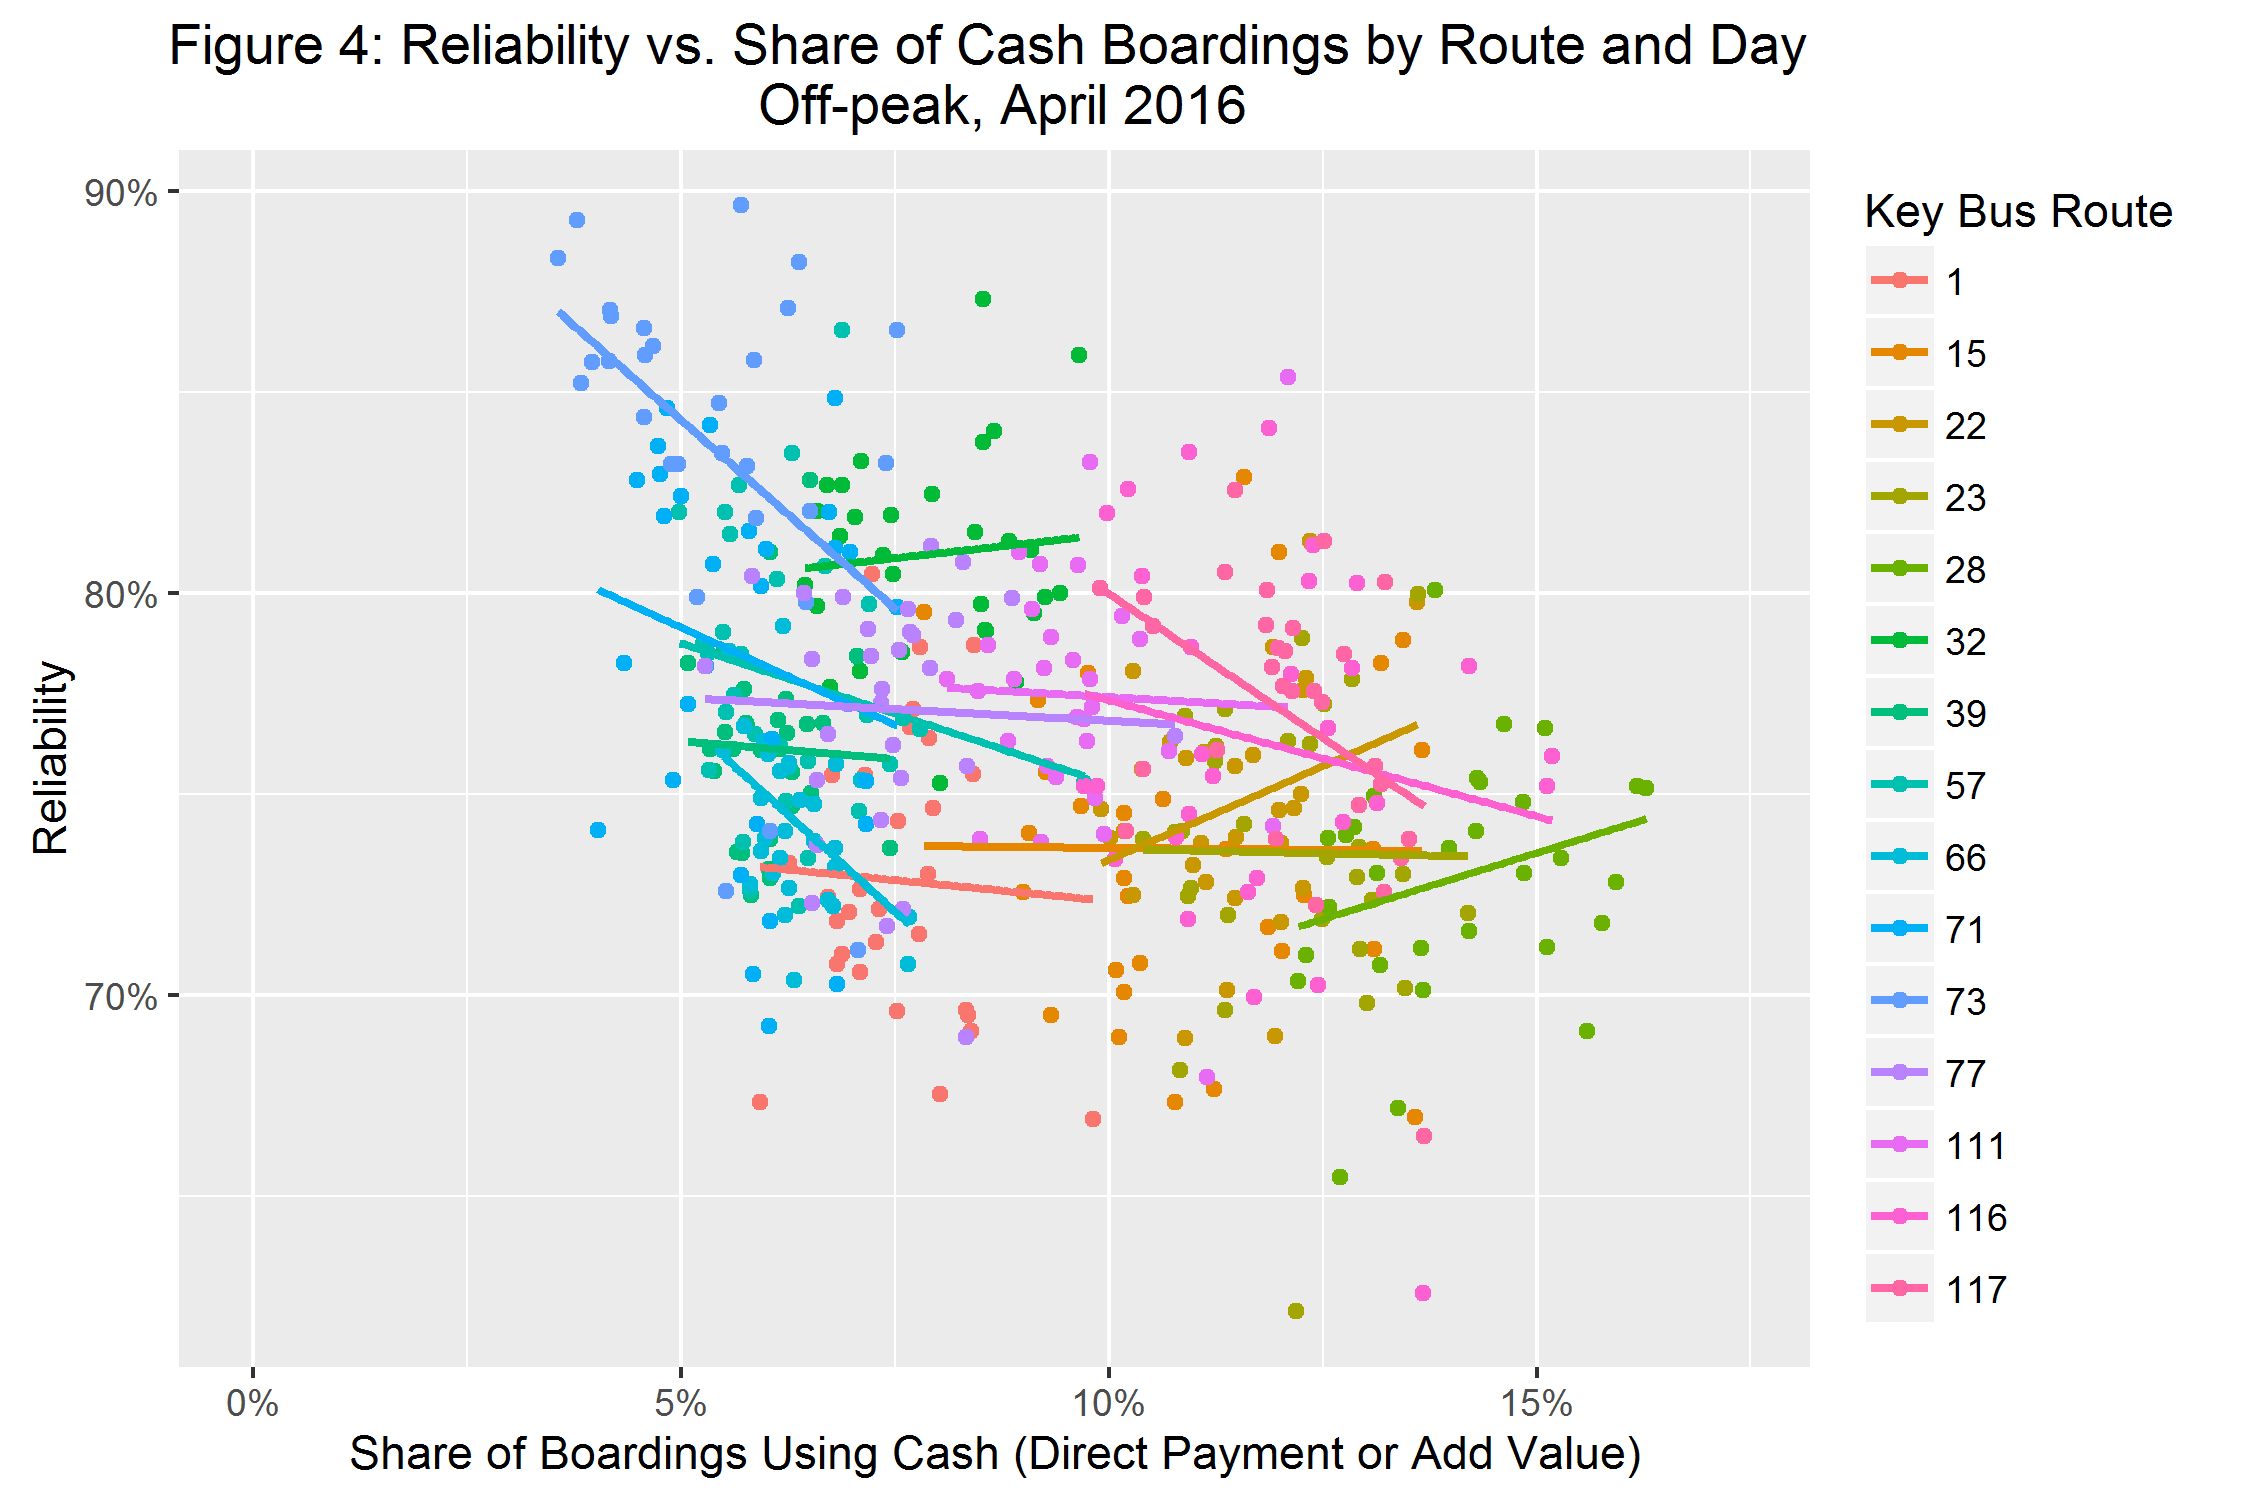 Reliability by share of boardings by day